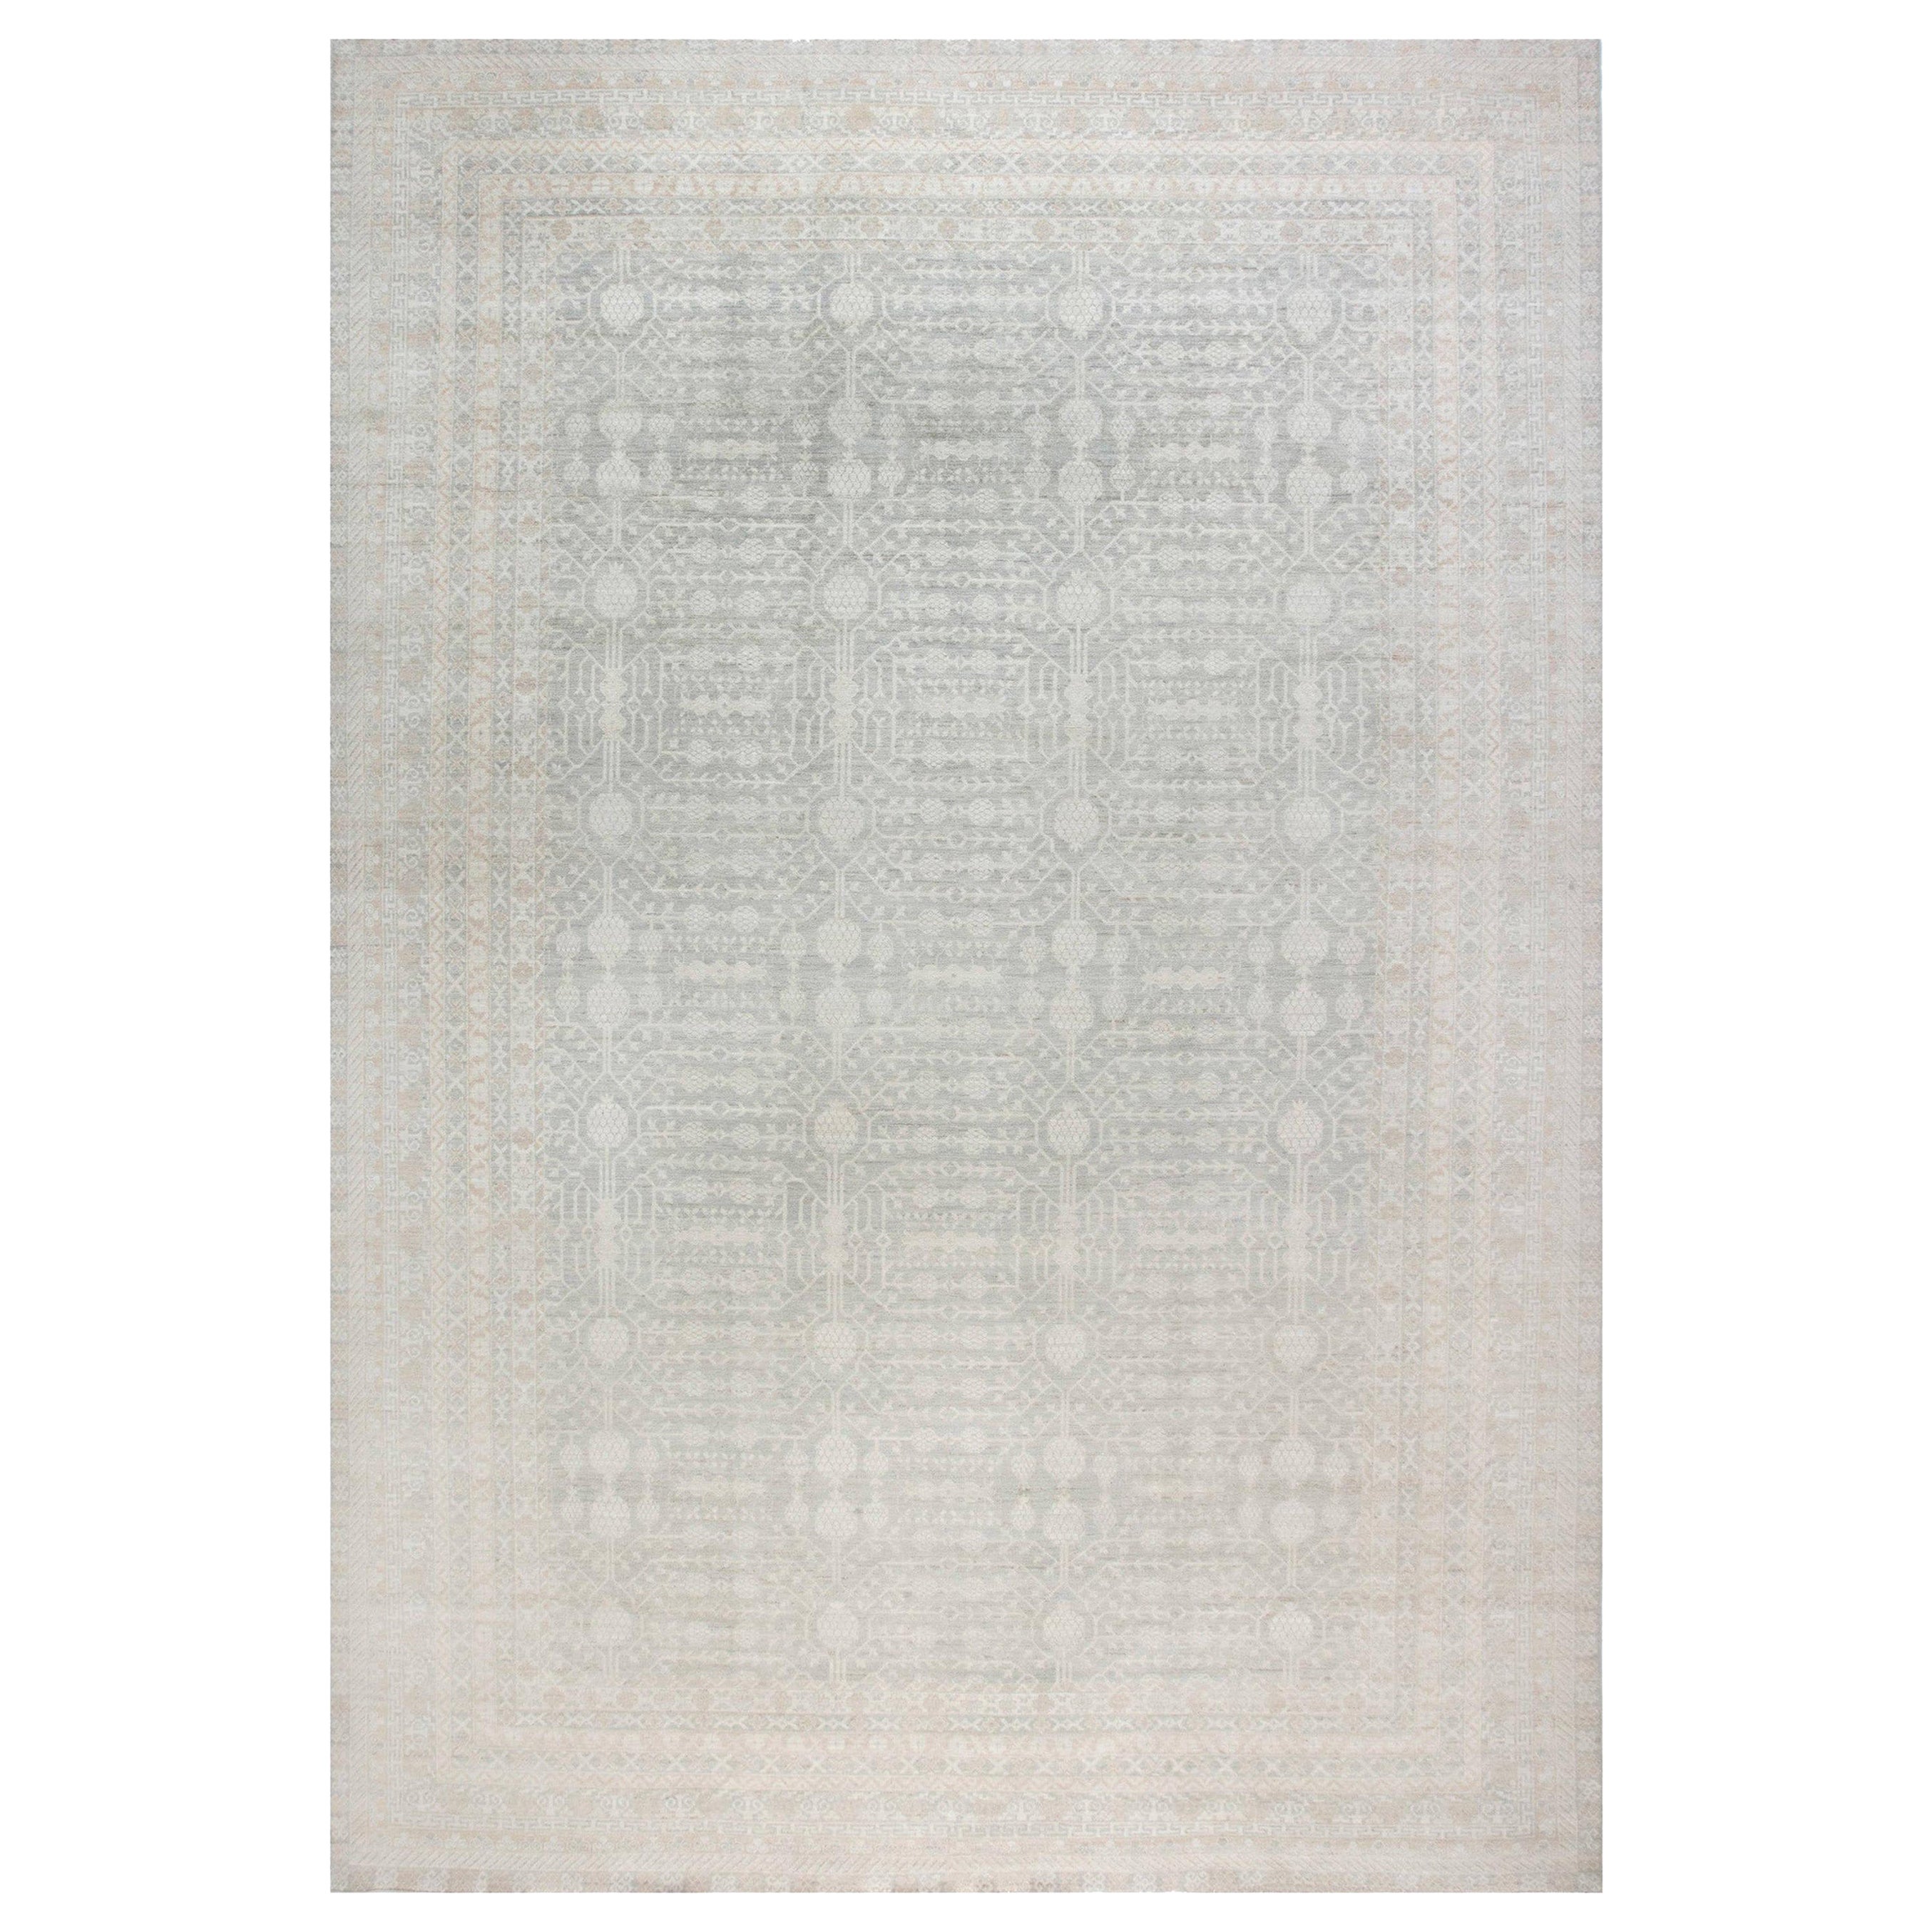 Contemporary Grey and Beige Samarkand Style Rug by Doris Leslie Blau